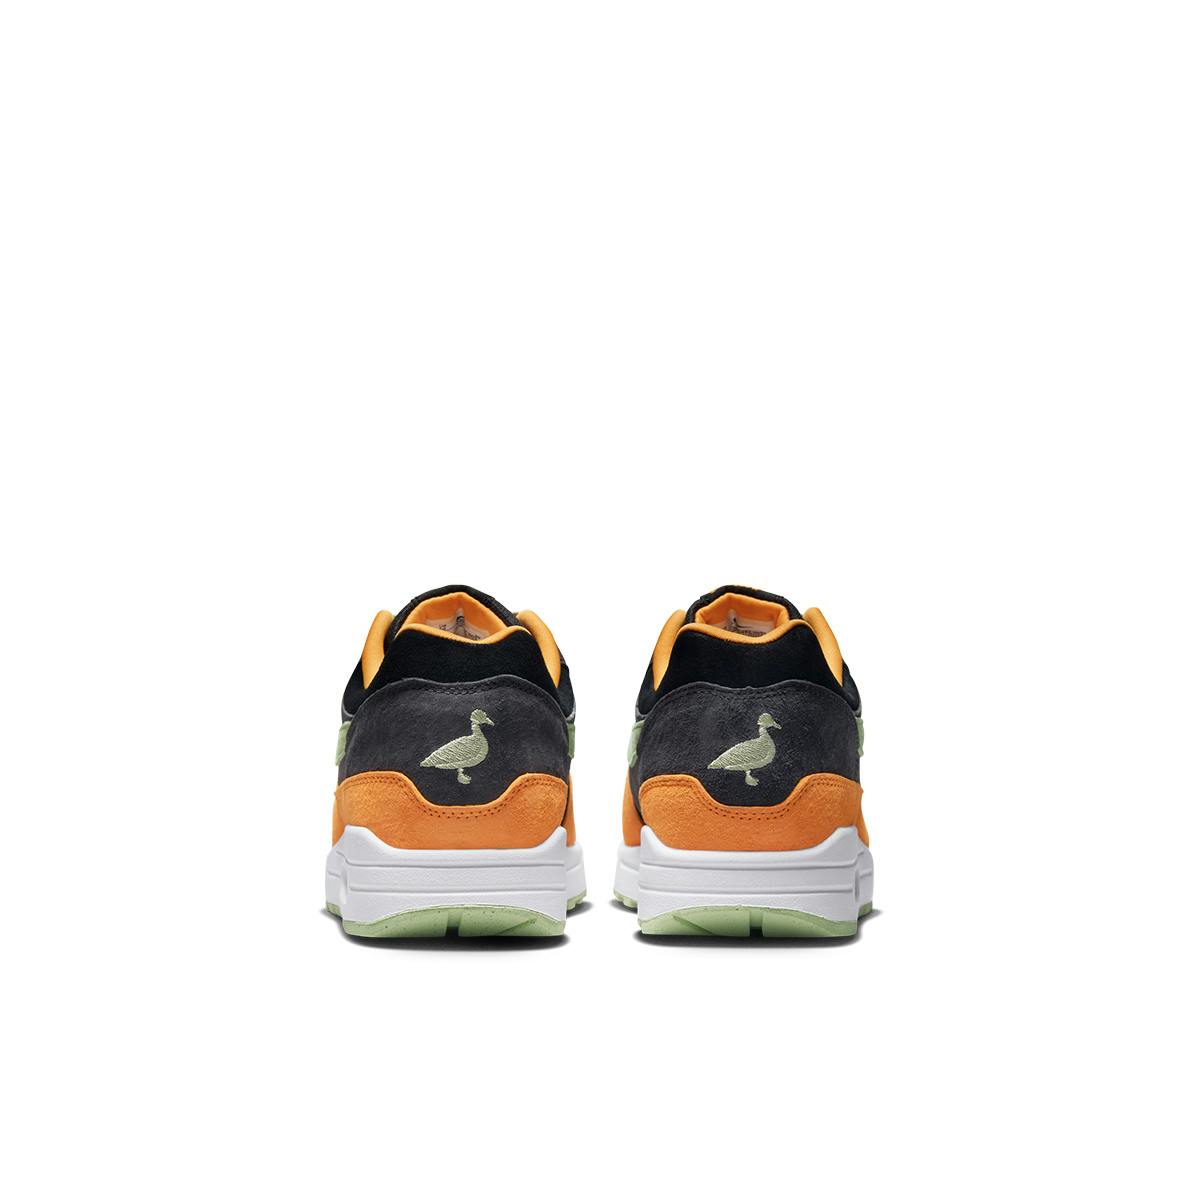 NIKE AIR MAX 1: NEW AGE OF THE UGLY DUCKLING | END. (US)